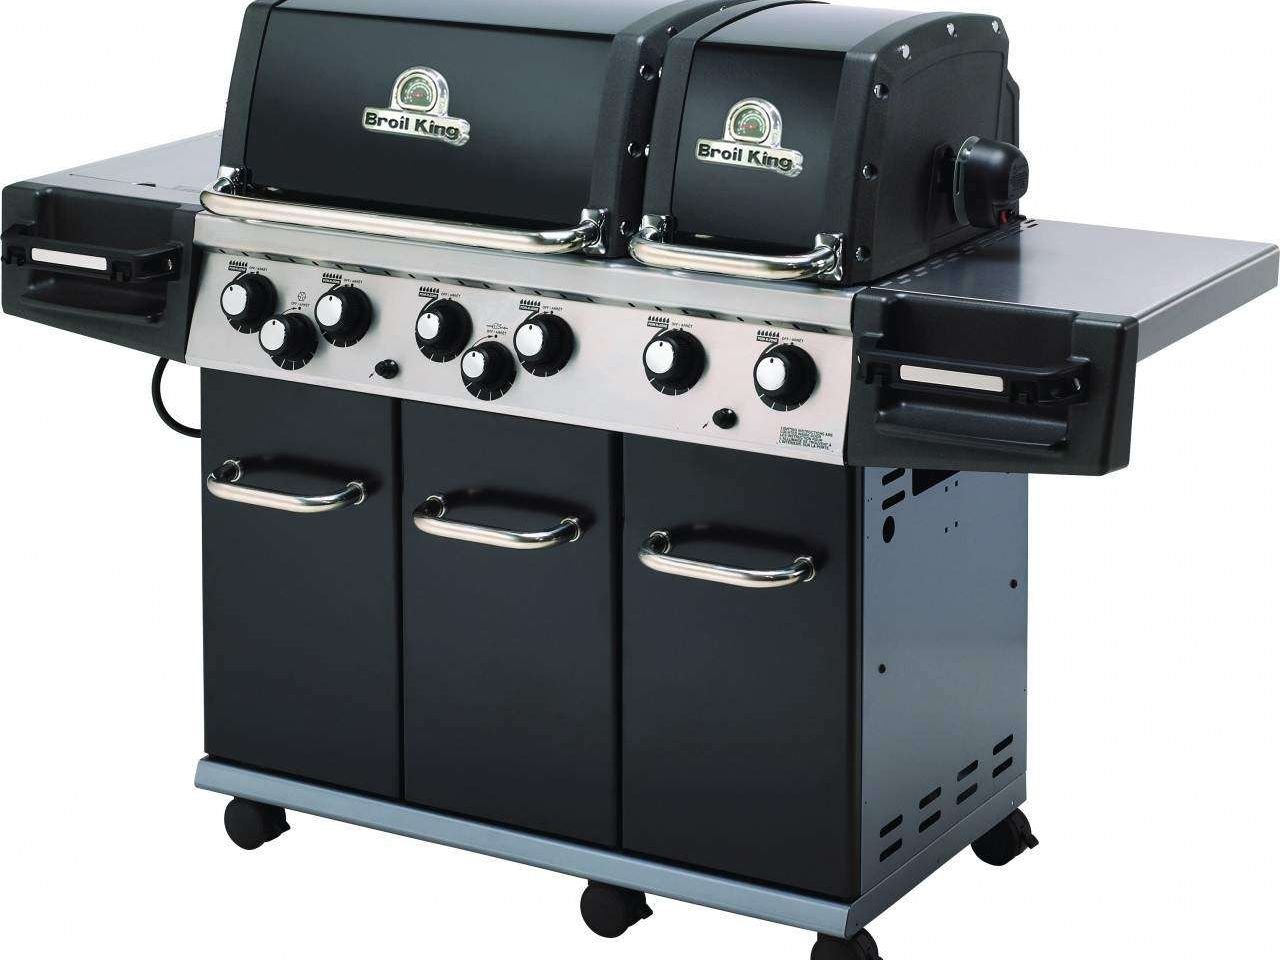 Barbecue Broil King mod. Regal - 2